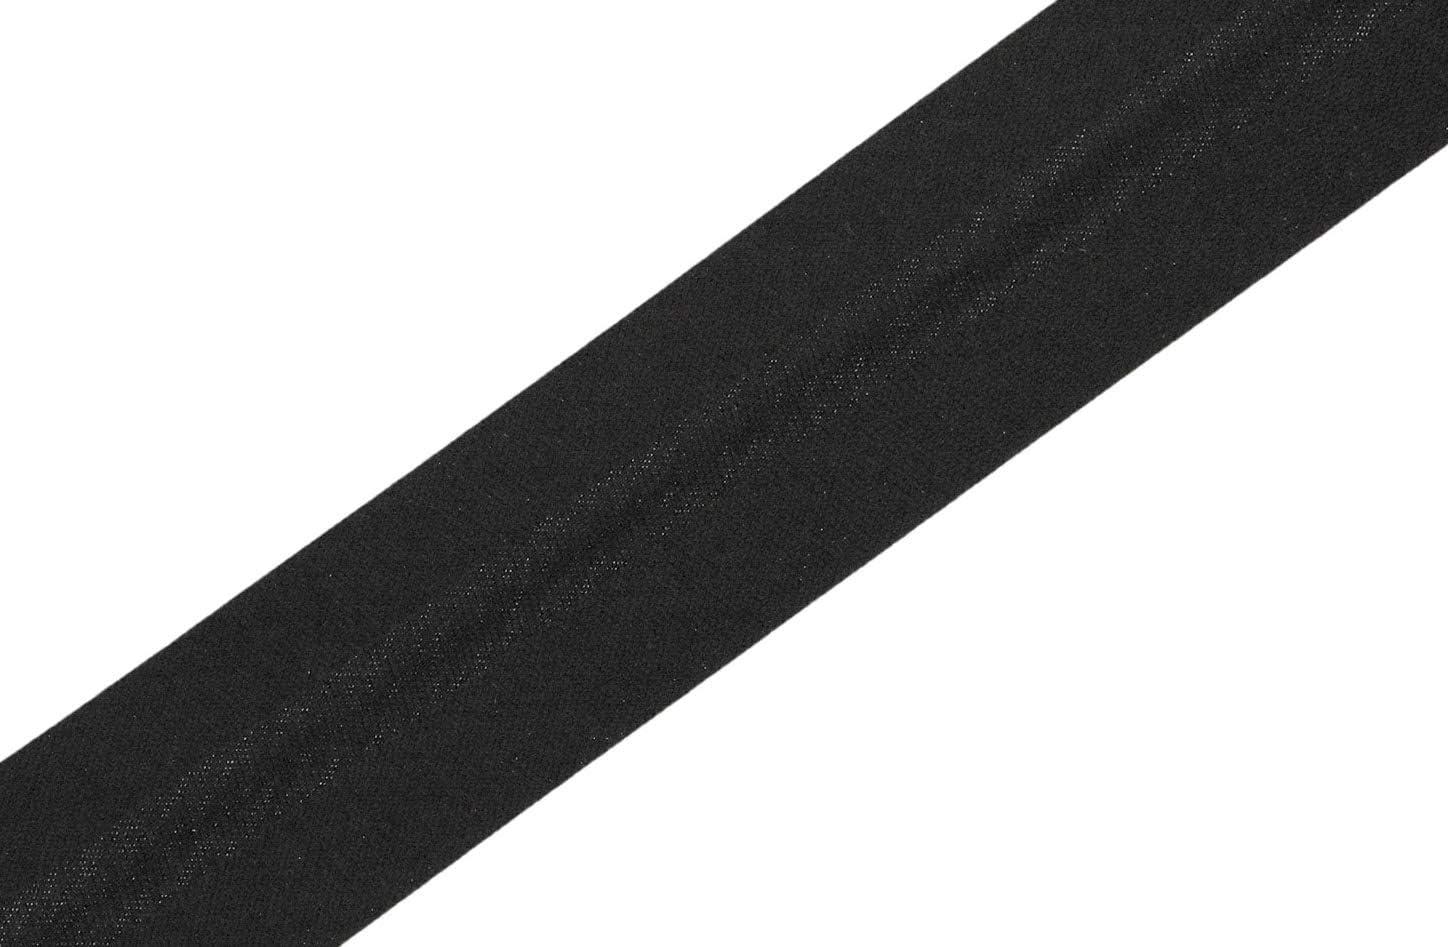  Bias Tape Double Fold 1/2 inch, Double Fold Bias Tape 55 Yards  Continuous Bulk Spool for Apparel Sewing, Quilting, Binding, Decorating,  DIY Craft, Polyester, Non-Stretch (13mm, 50 Meters, Black)